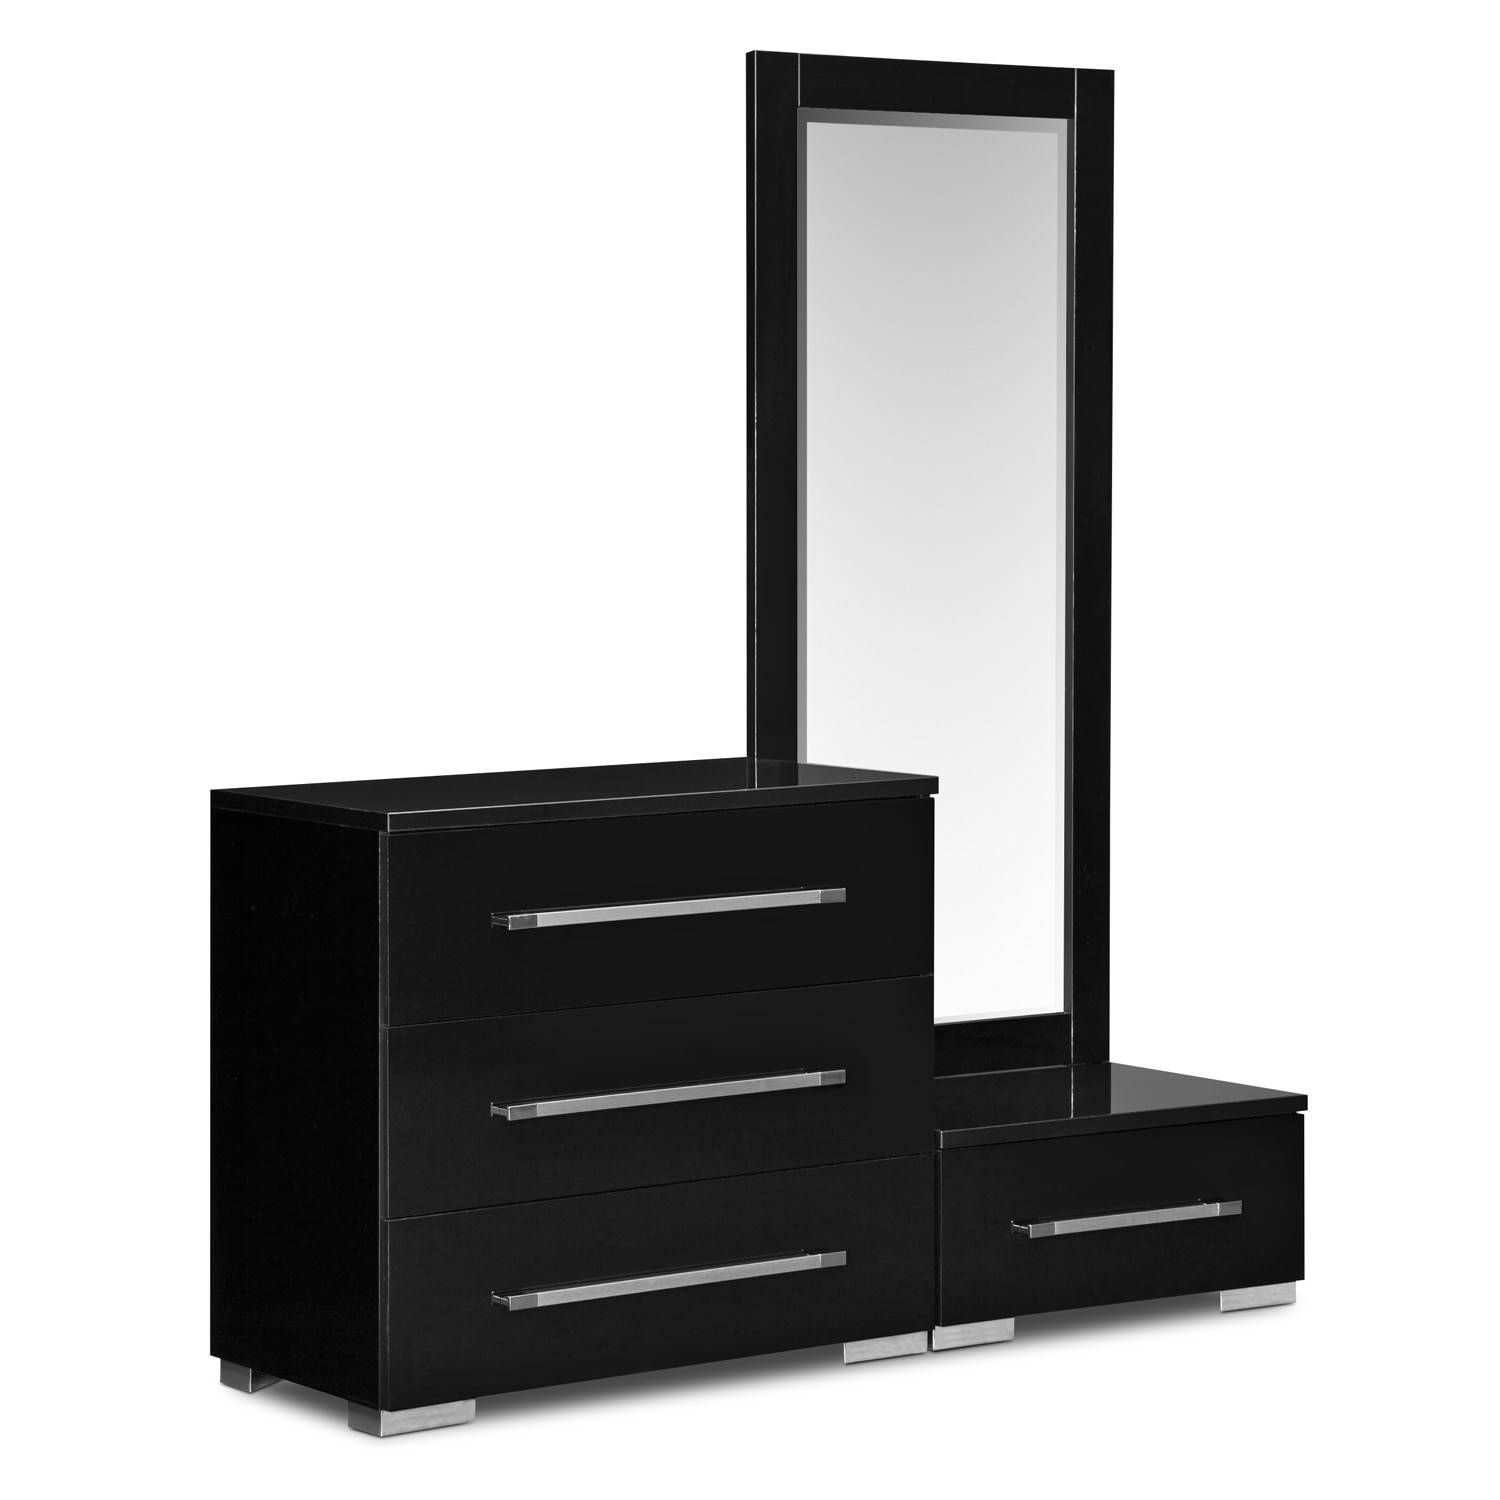 Dimora Dressing Dresser And Mirror With Step – Black | Value City With Regard To Black Dressing Mirrors (View 2 of 25)